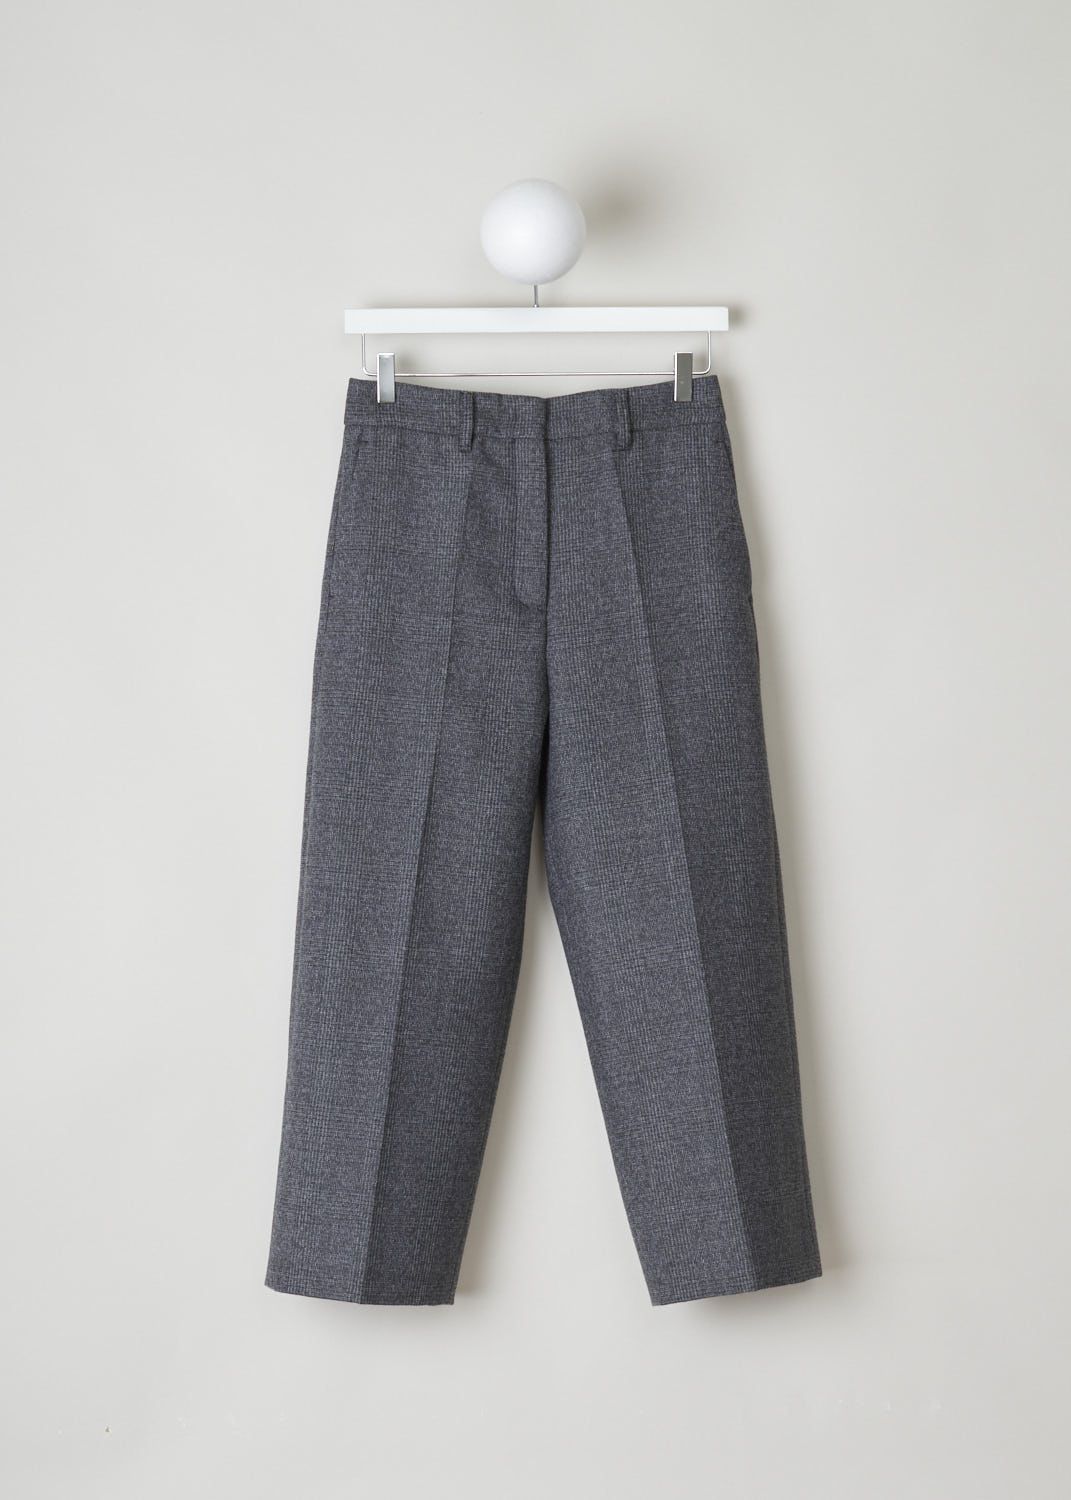 PRADA, GREY TWEED TROUSERS, LJH_GALLES_MOULINE_P293BC_F0480_ARDESIA, Grey, Front, Sturdy grey tweed trousers. These trousers have belt loops, a clasp and zip fastening, slanted pockets in the front and welt pockets in the back. On the pant legs, centre pleats can be found front and back.
